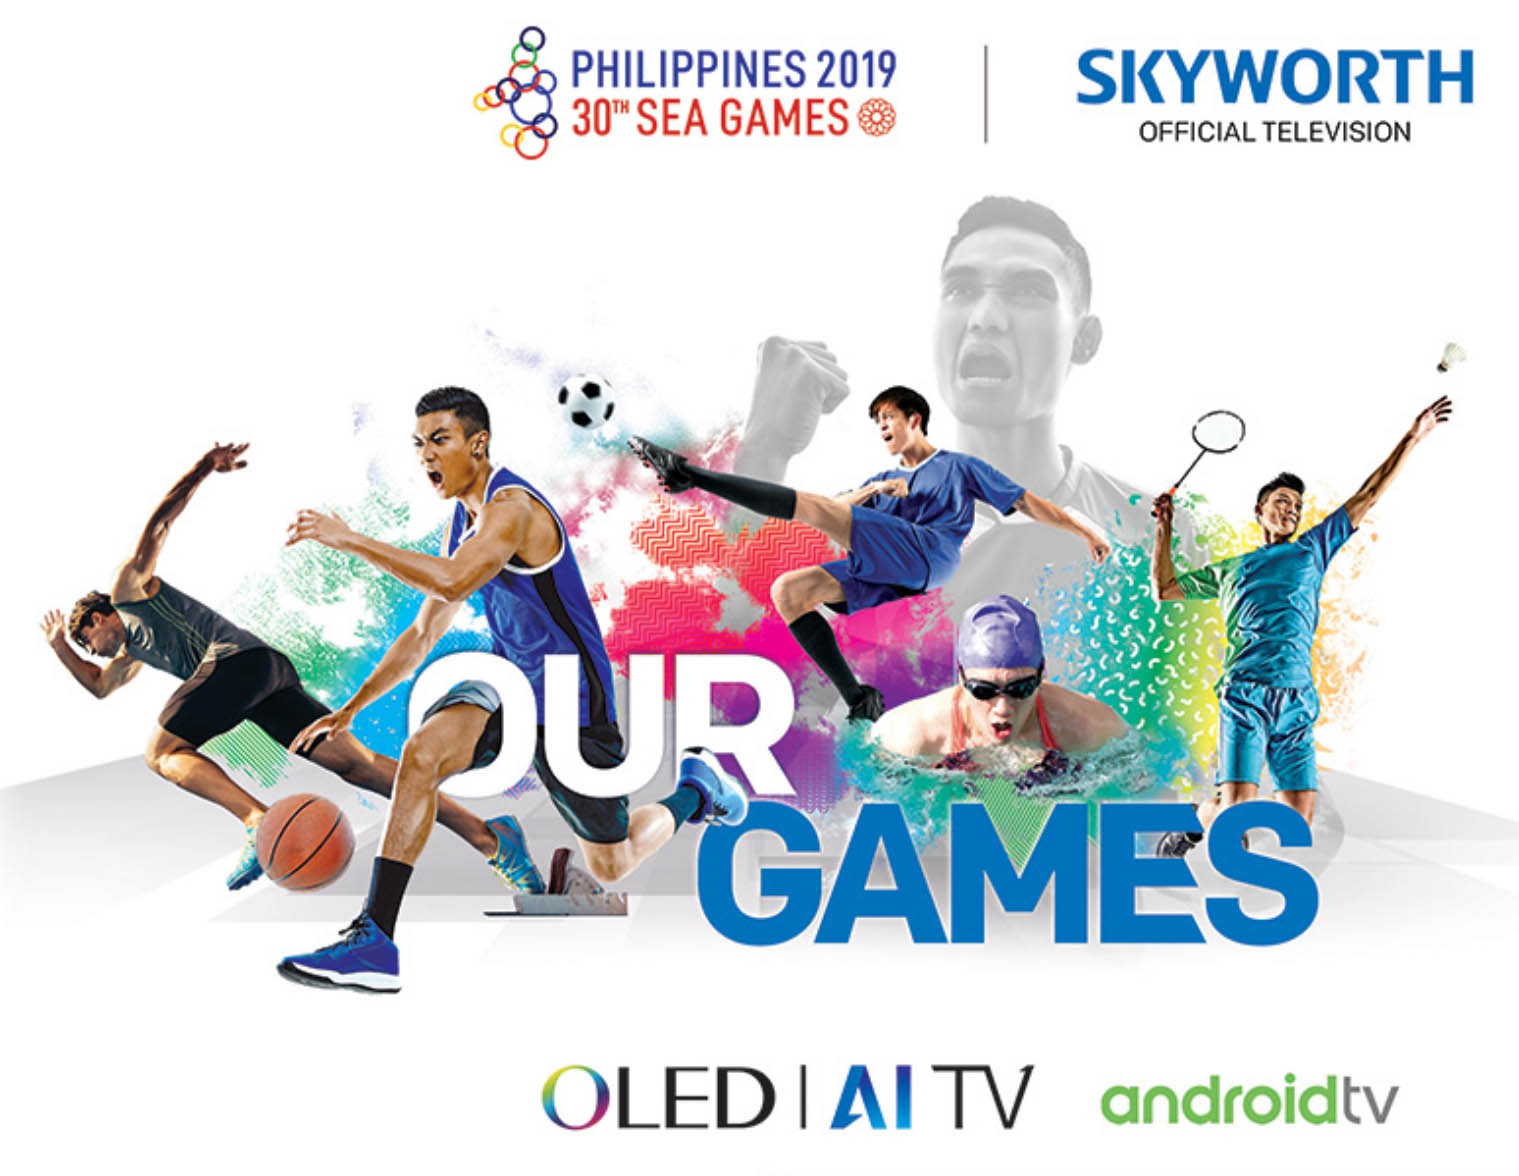 SKYWORTH official TV partner of the 30th SEA Games launches new promo for a front-row seat to the multi-sport event